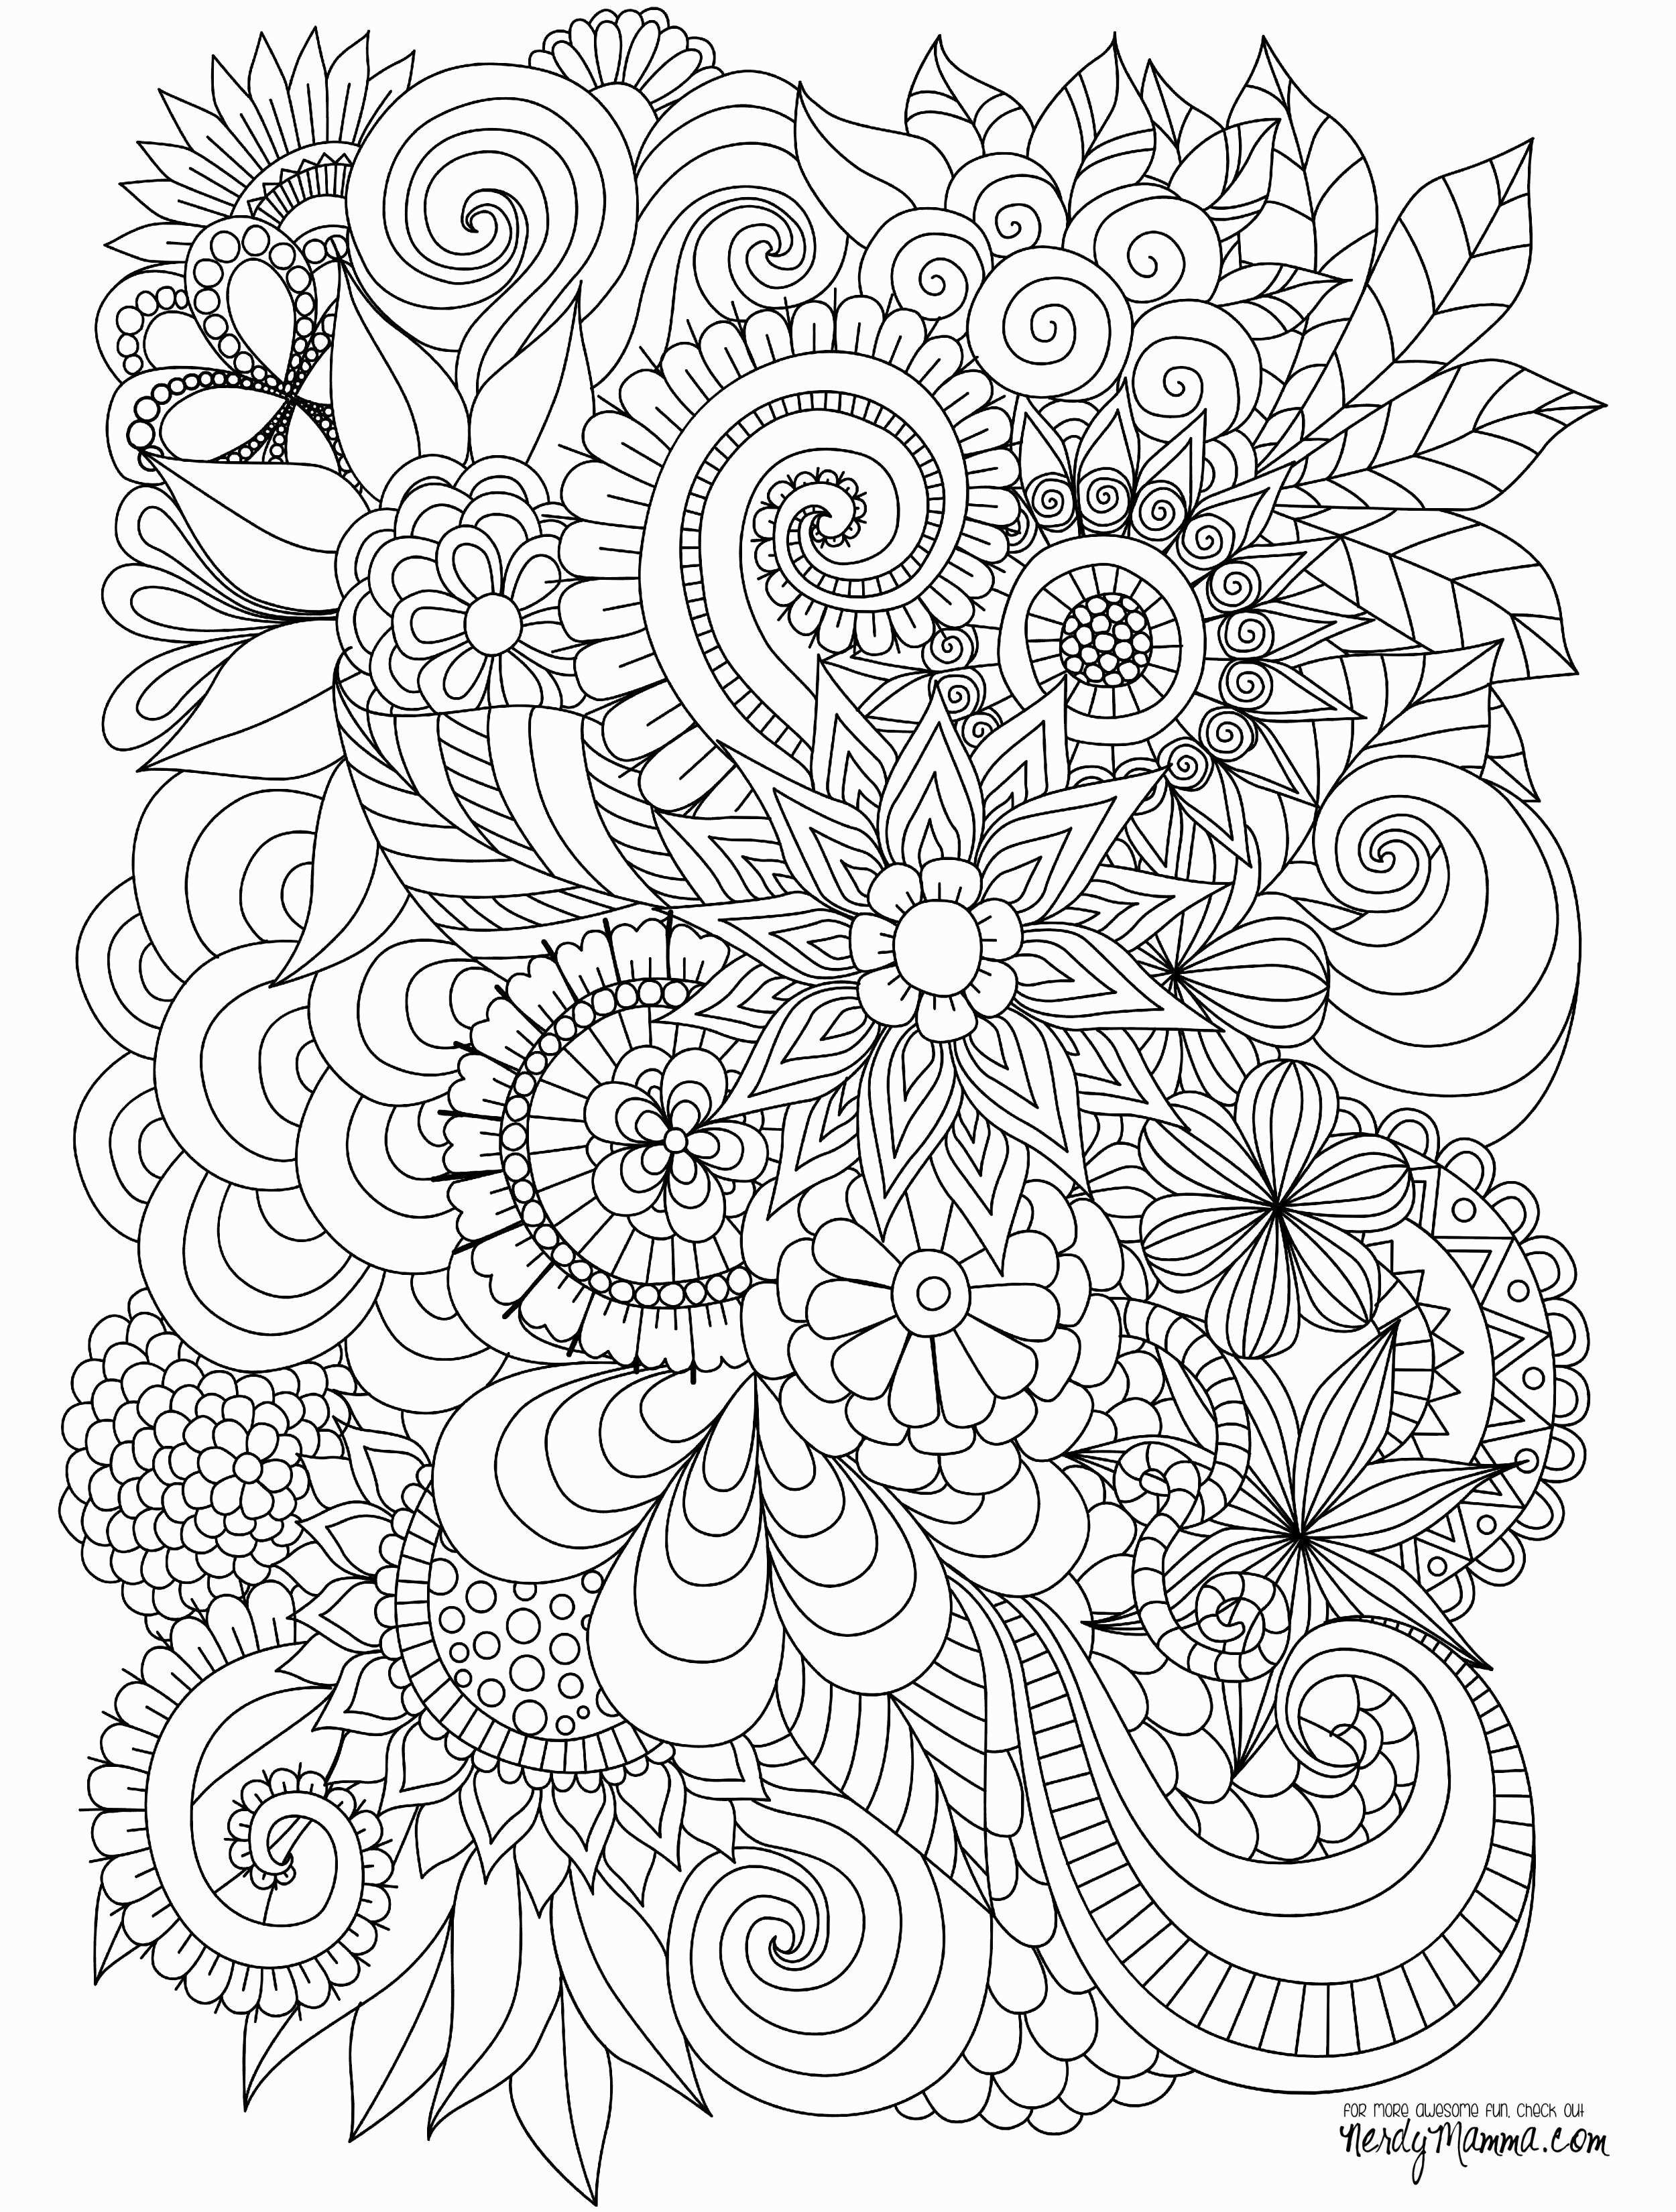 A Turkey Coloring Page